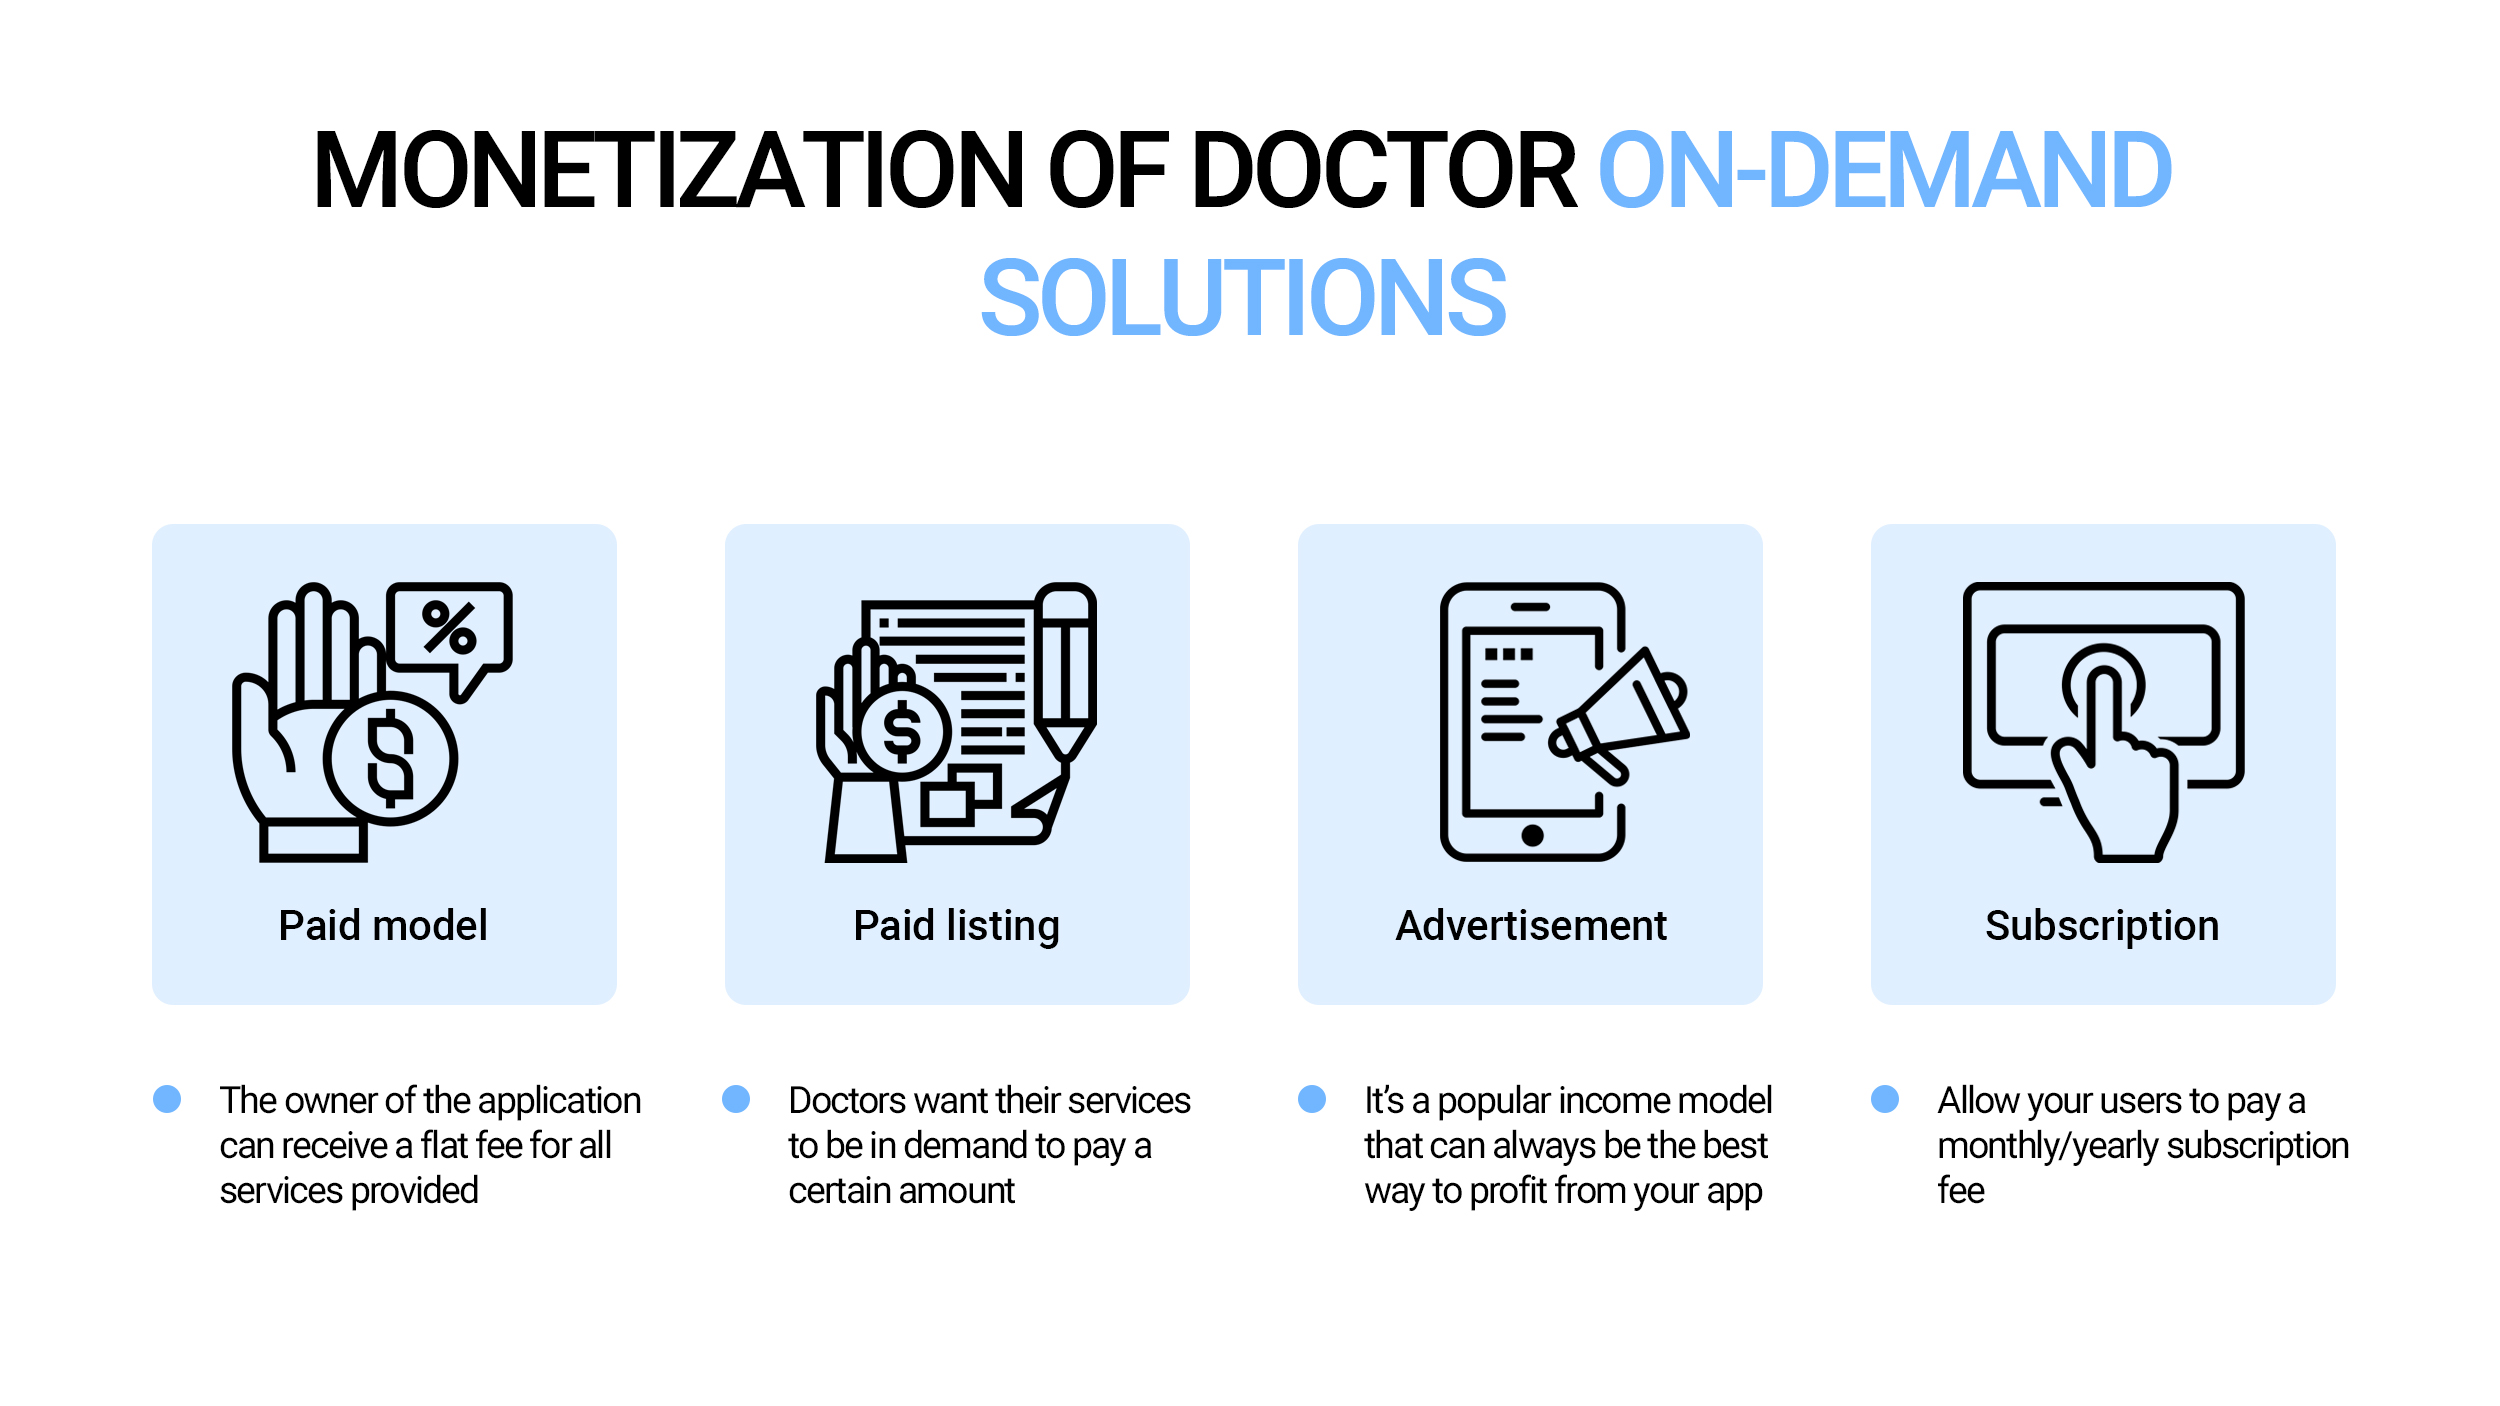 Monetization of Doctor On-Demand Solutions